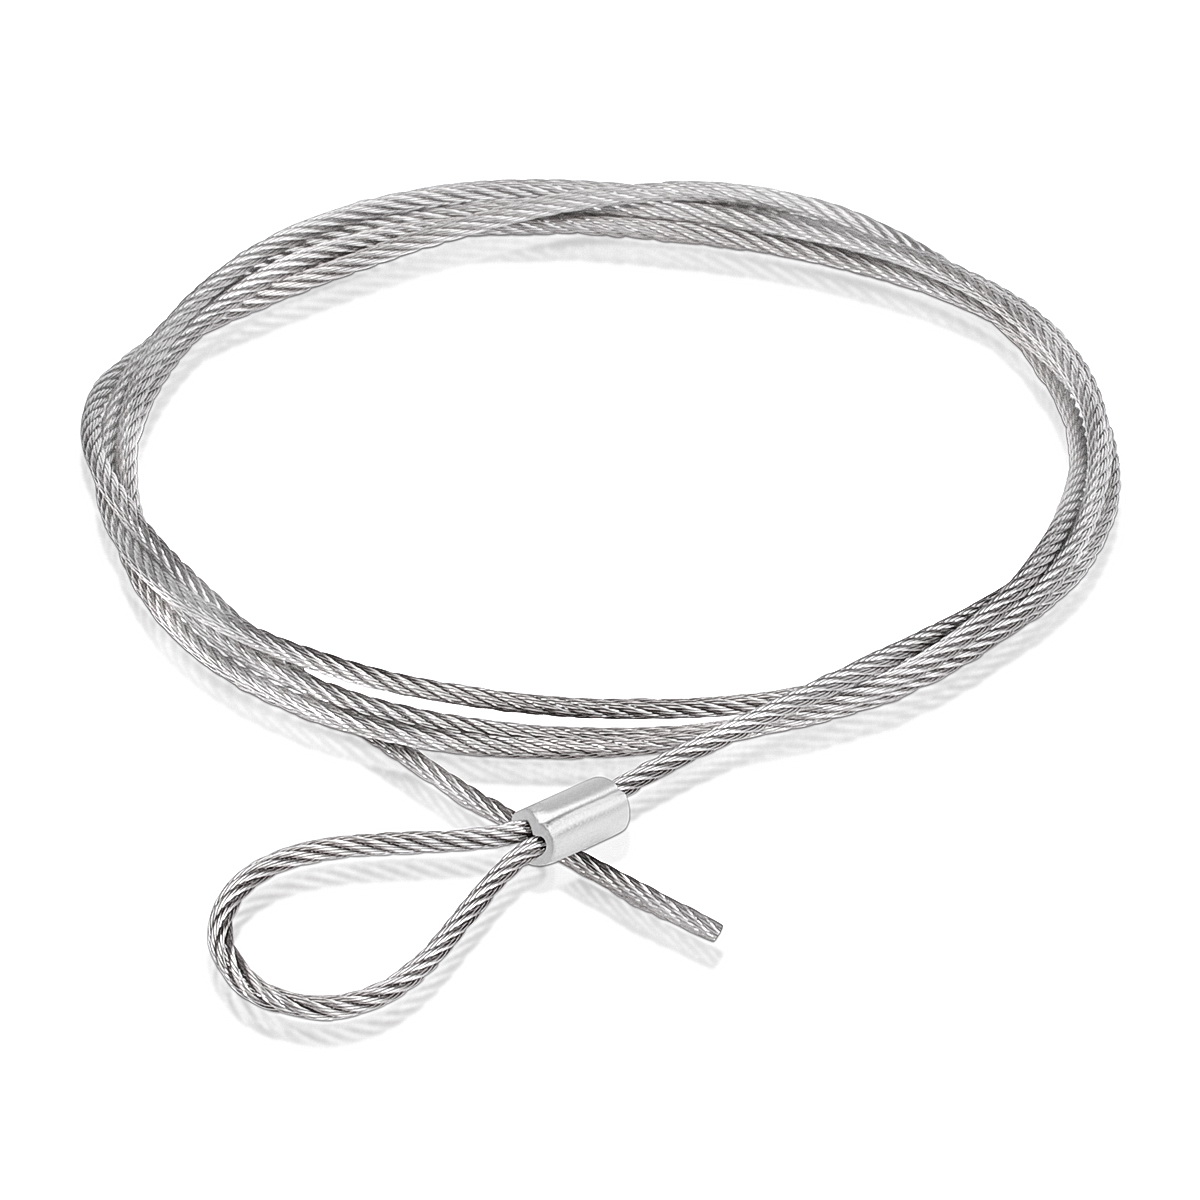 Looped Stainless Steel Cable - 120''